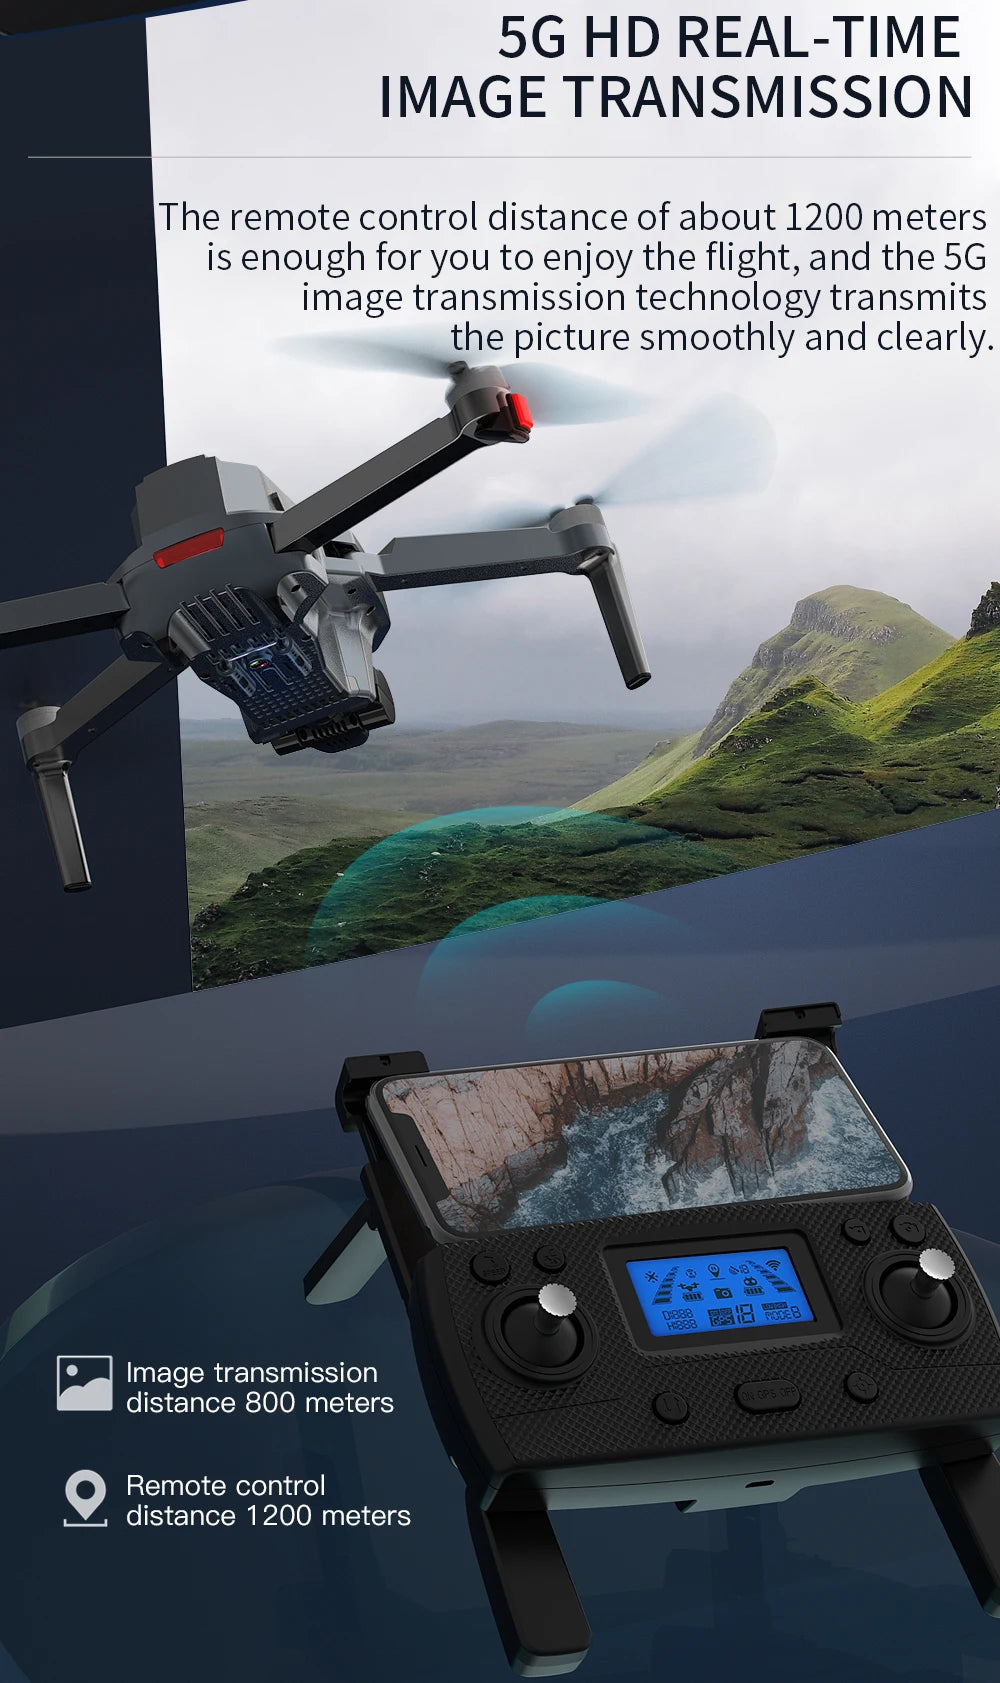 ZLL SG107 PRO Drone, the remote control distance of about 1200 meters is enough for you to